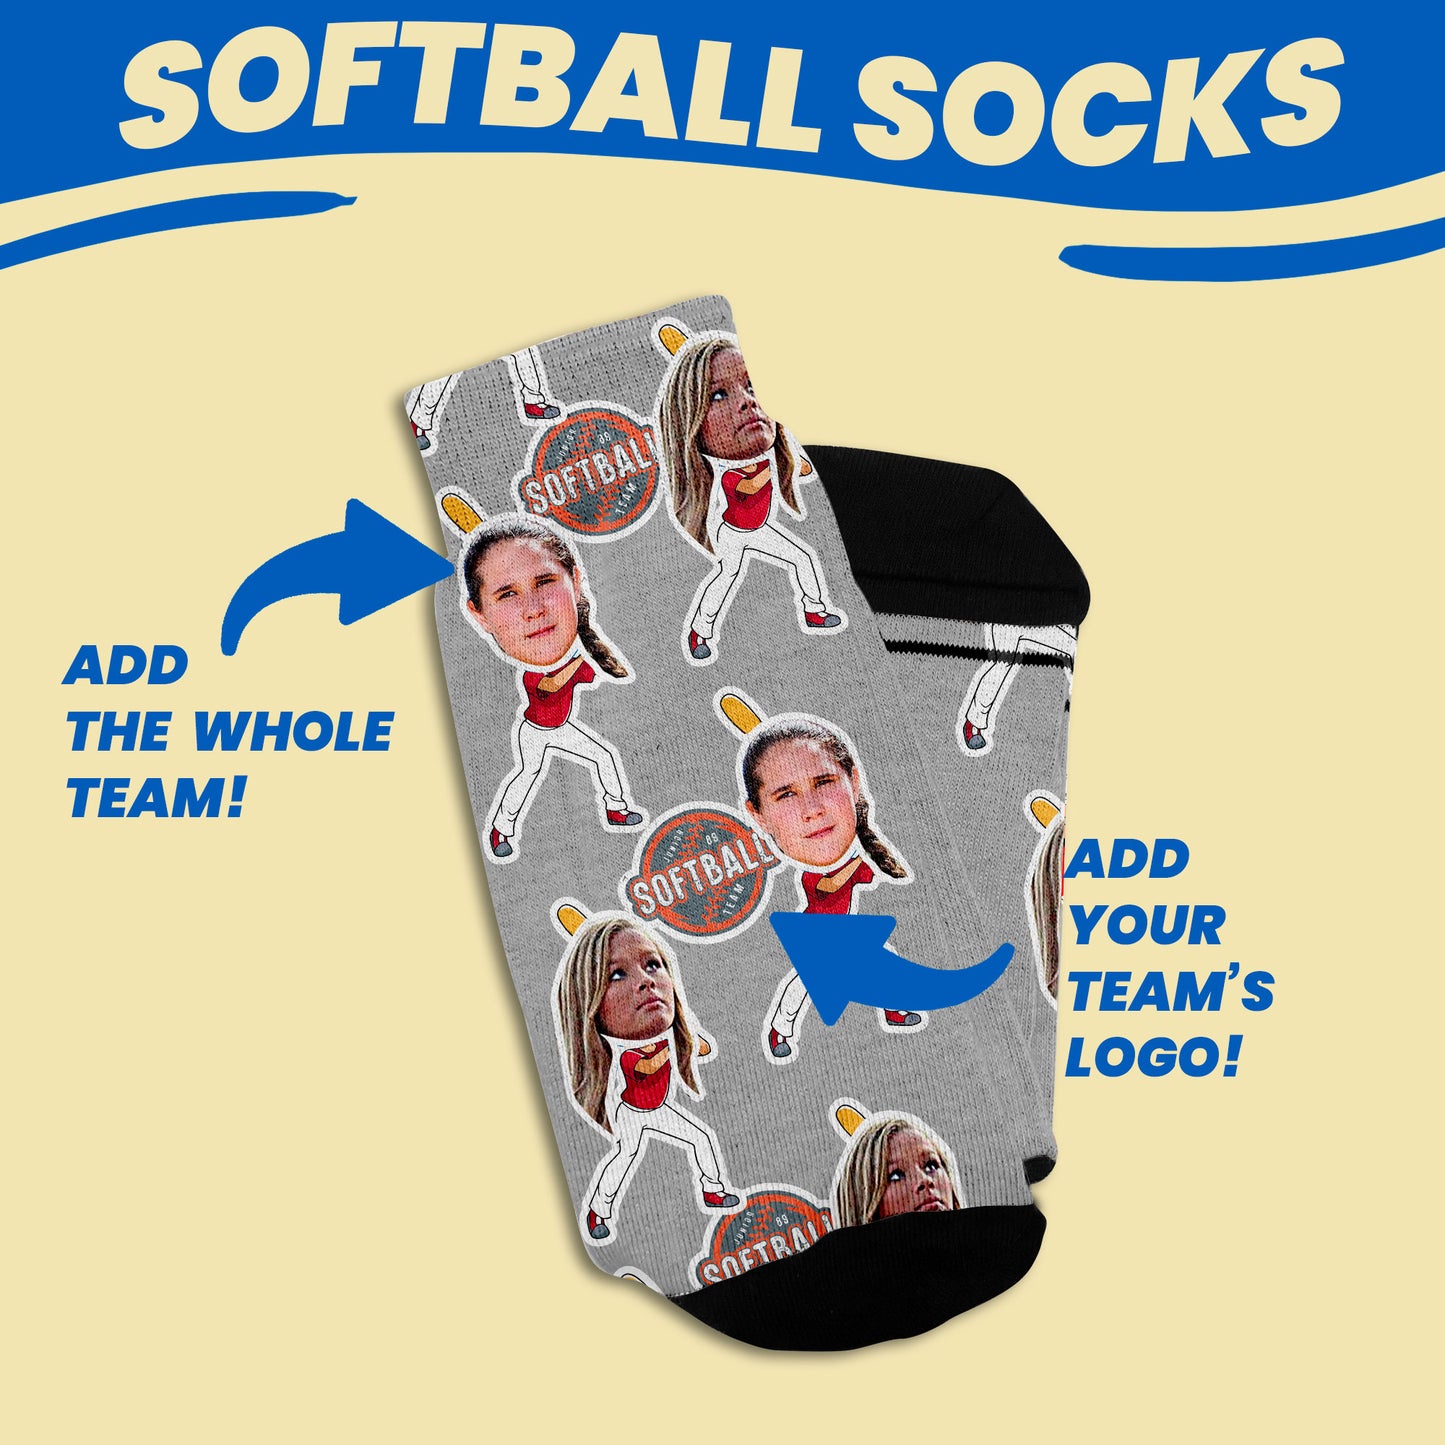 personalized softball socks with real photos on cartoon bodies with multiple team players and team logo